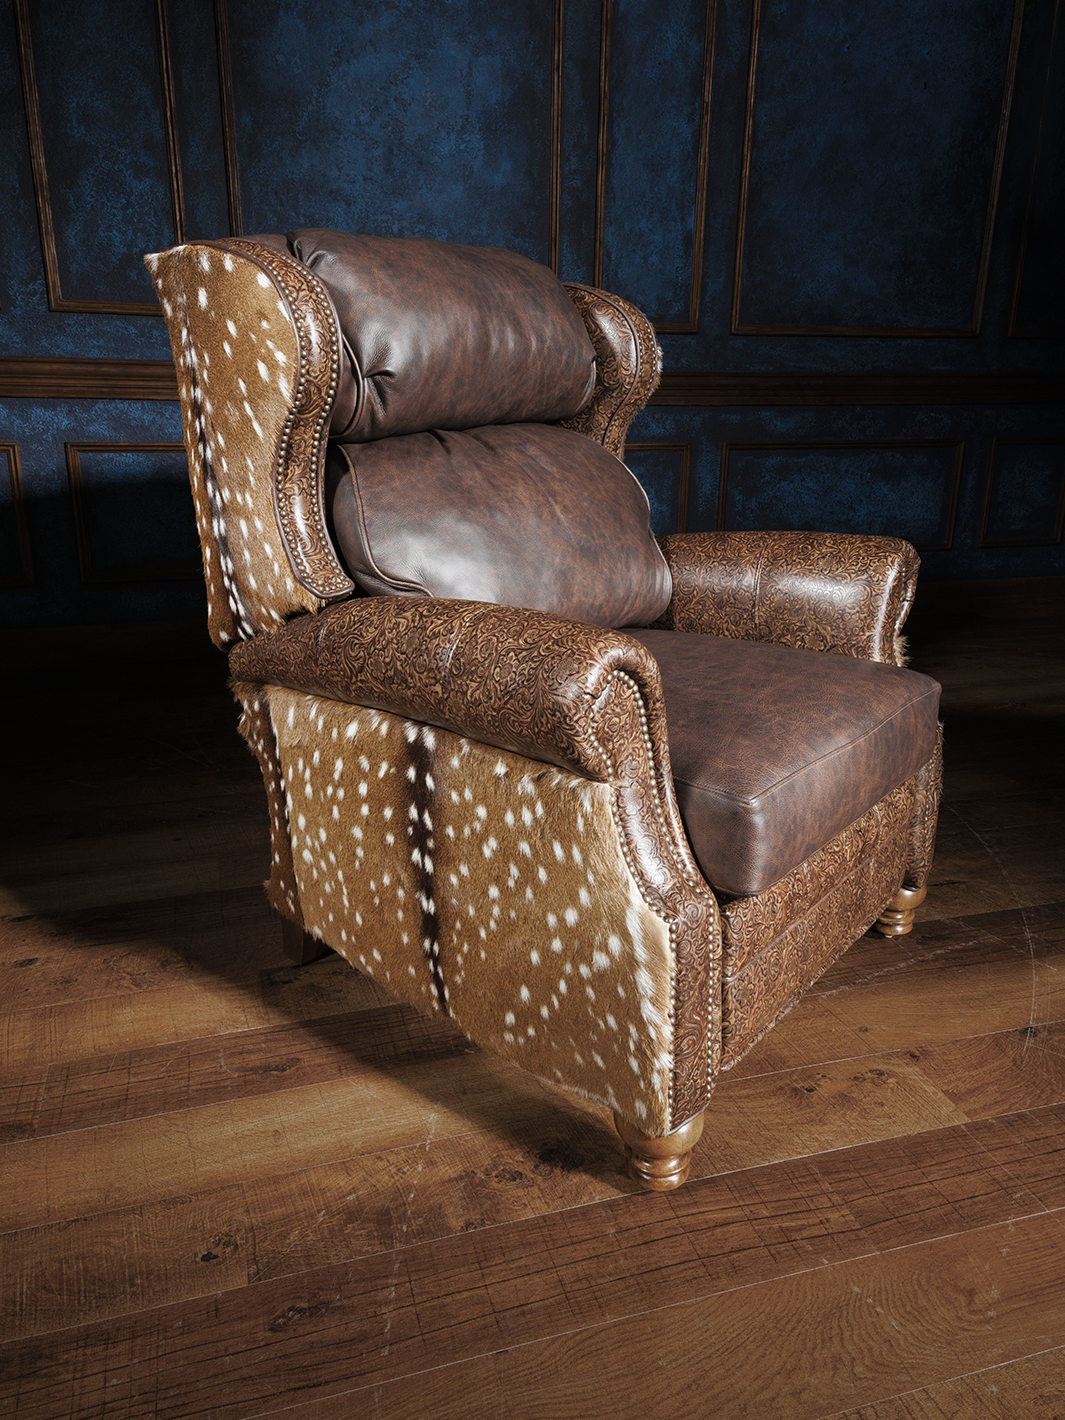 Western Leather Recliners, Western Cowhide Recliners